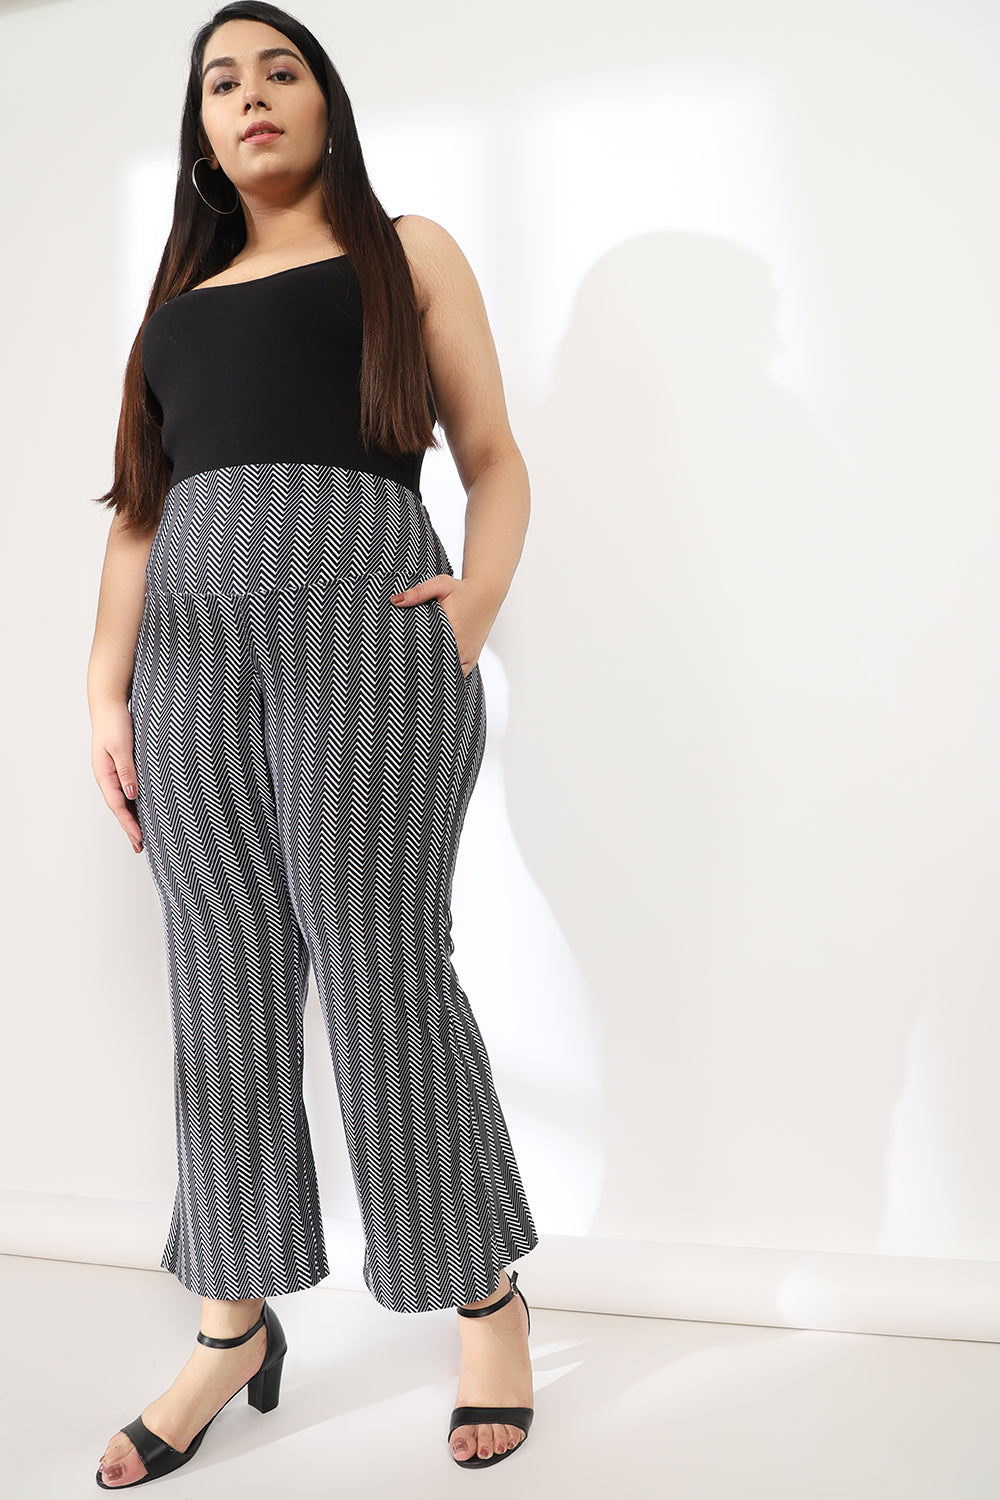 Plus Size Flare Pants Outfit Hot Sale  wwwillvacom 1693232198